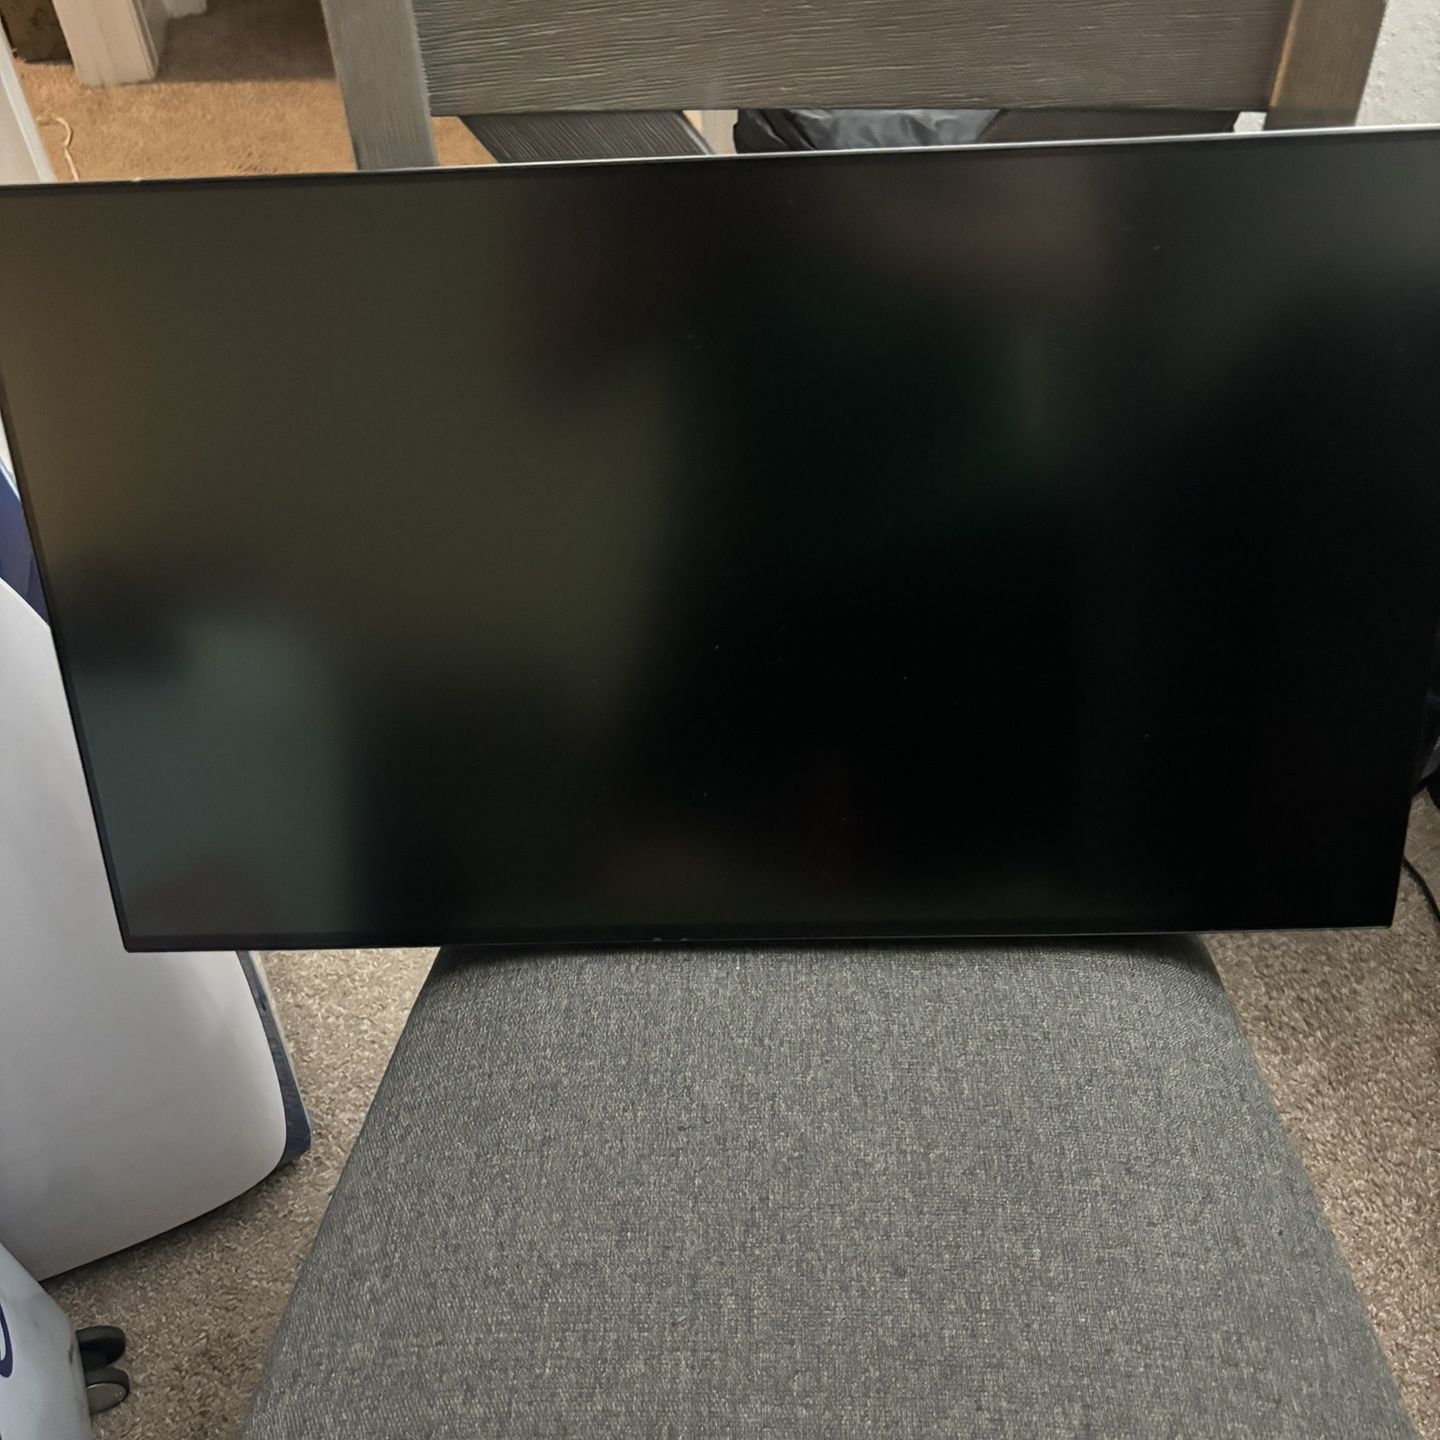 Alienware AW2723DF Gaming Monitor - 27-inch (2560 x 1440) 240Hz